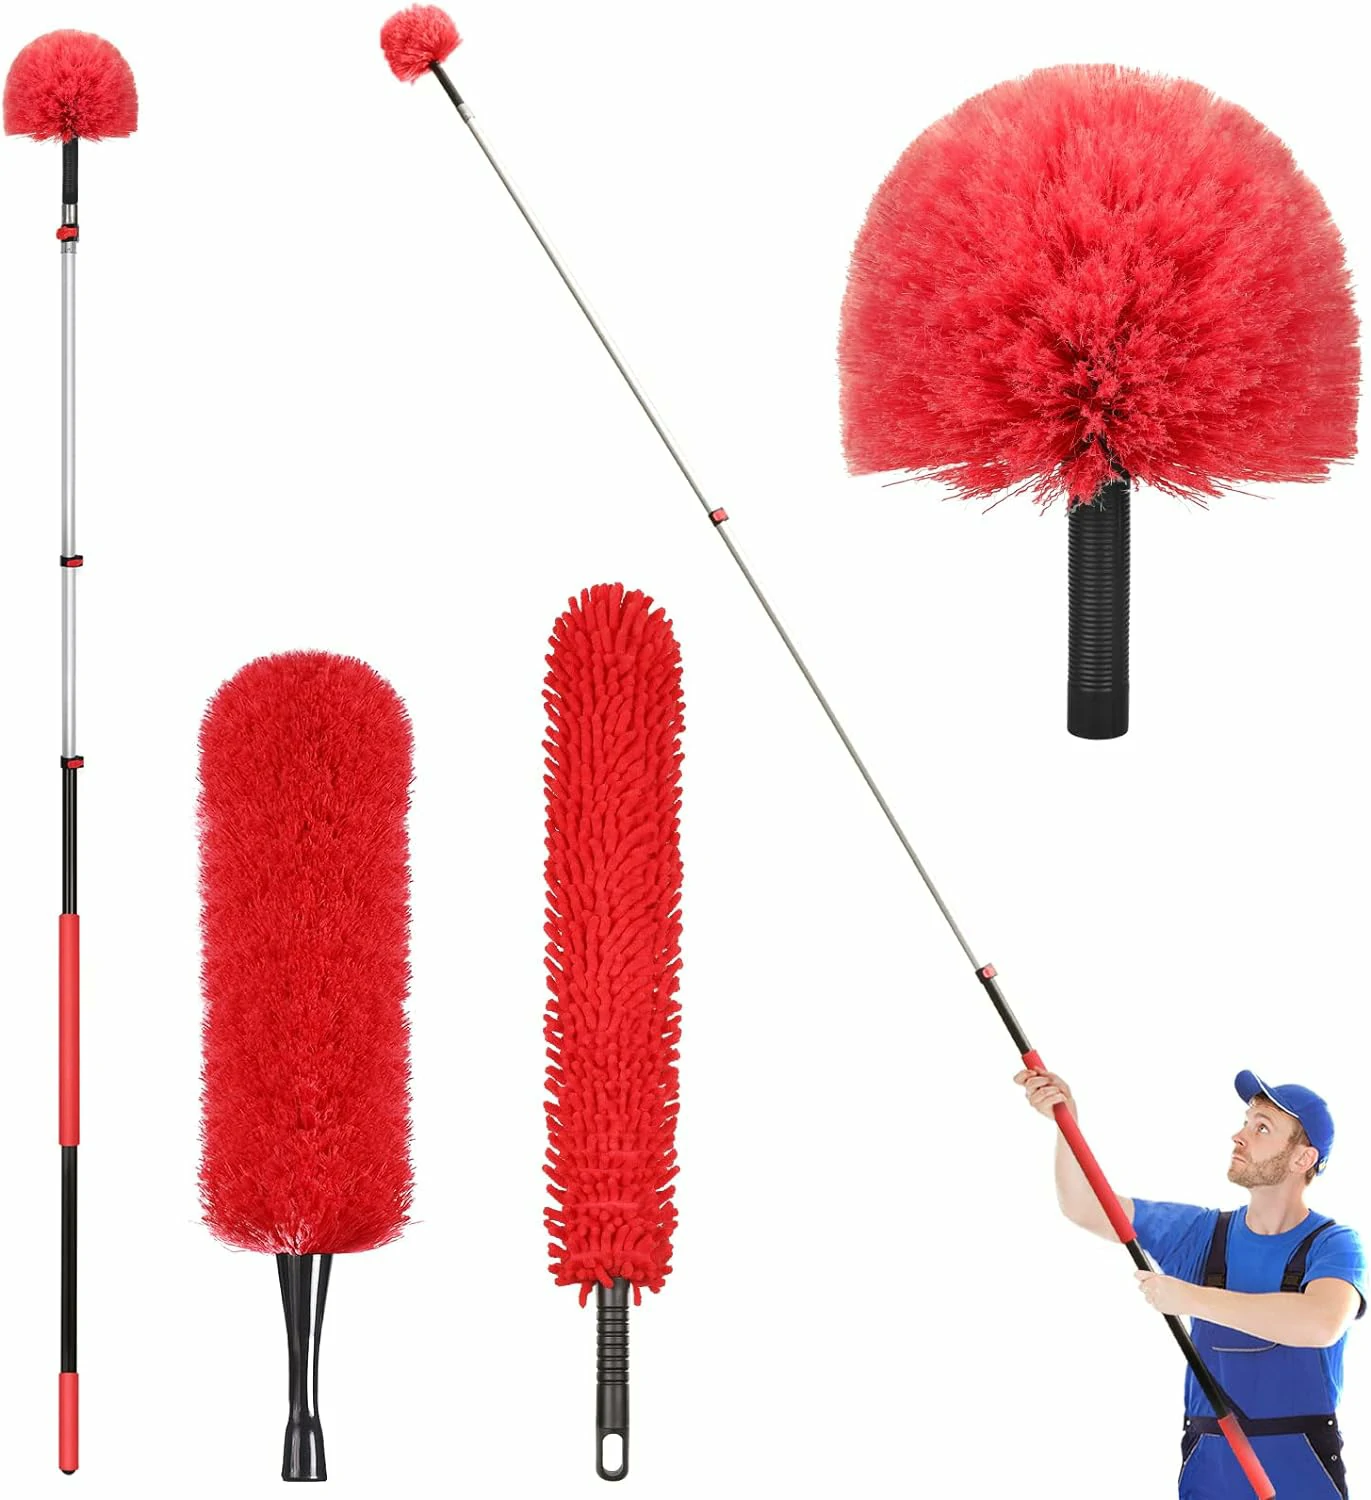 EVEAGE 20 Foot High Reach Dusting Kit with 5-12 Foot Extension Pole